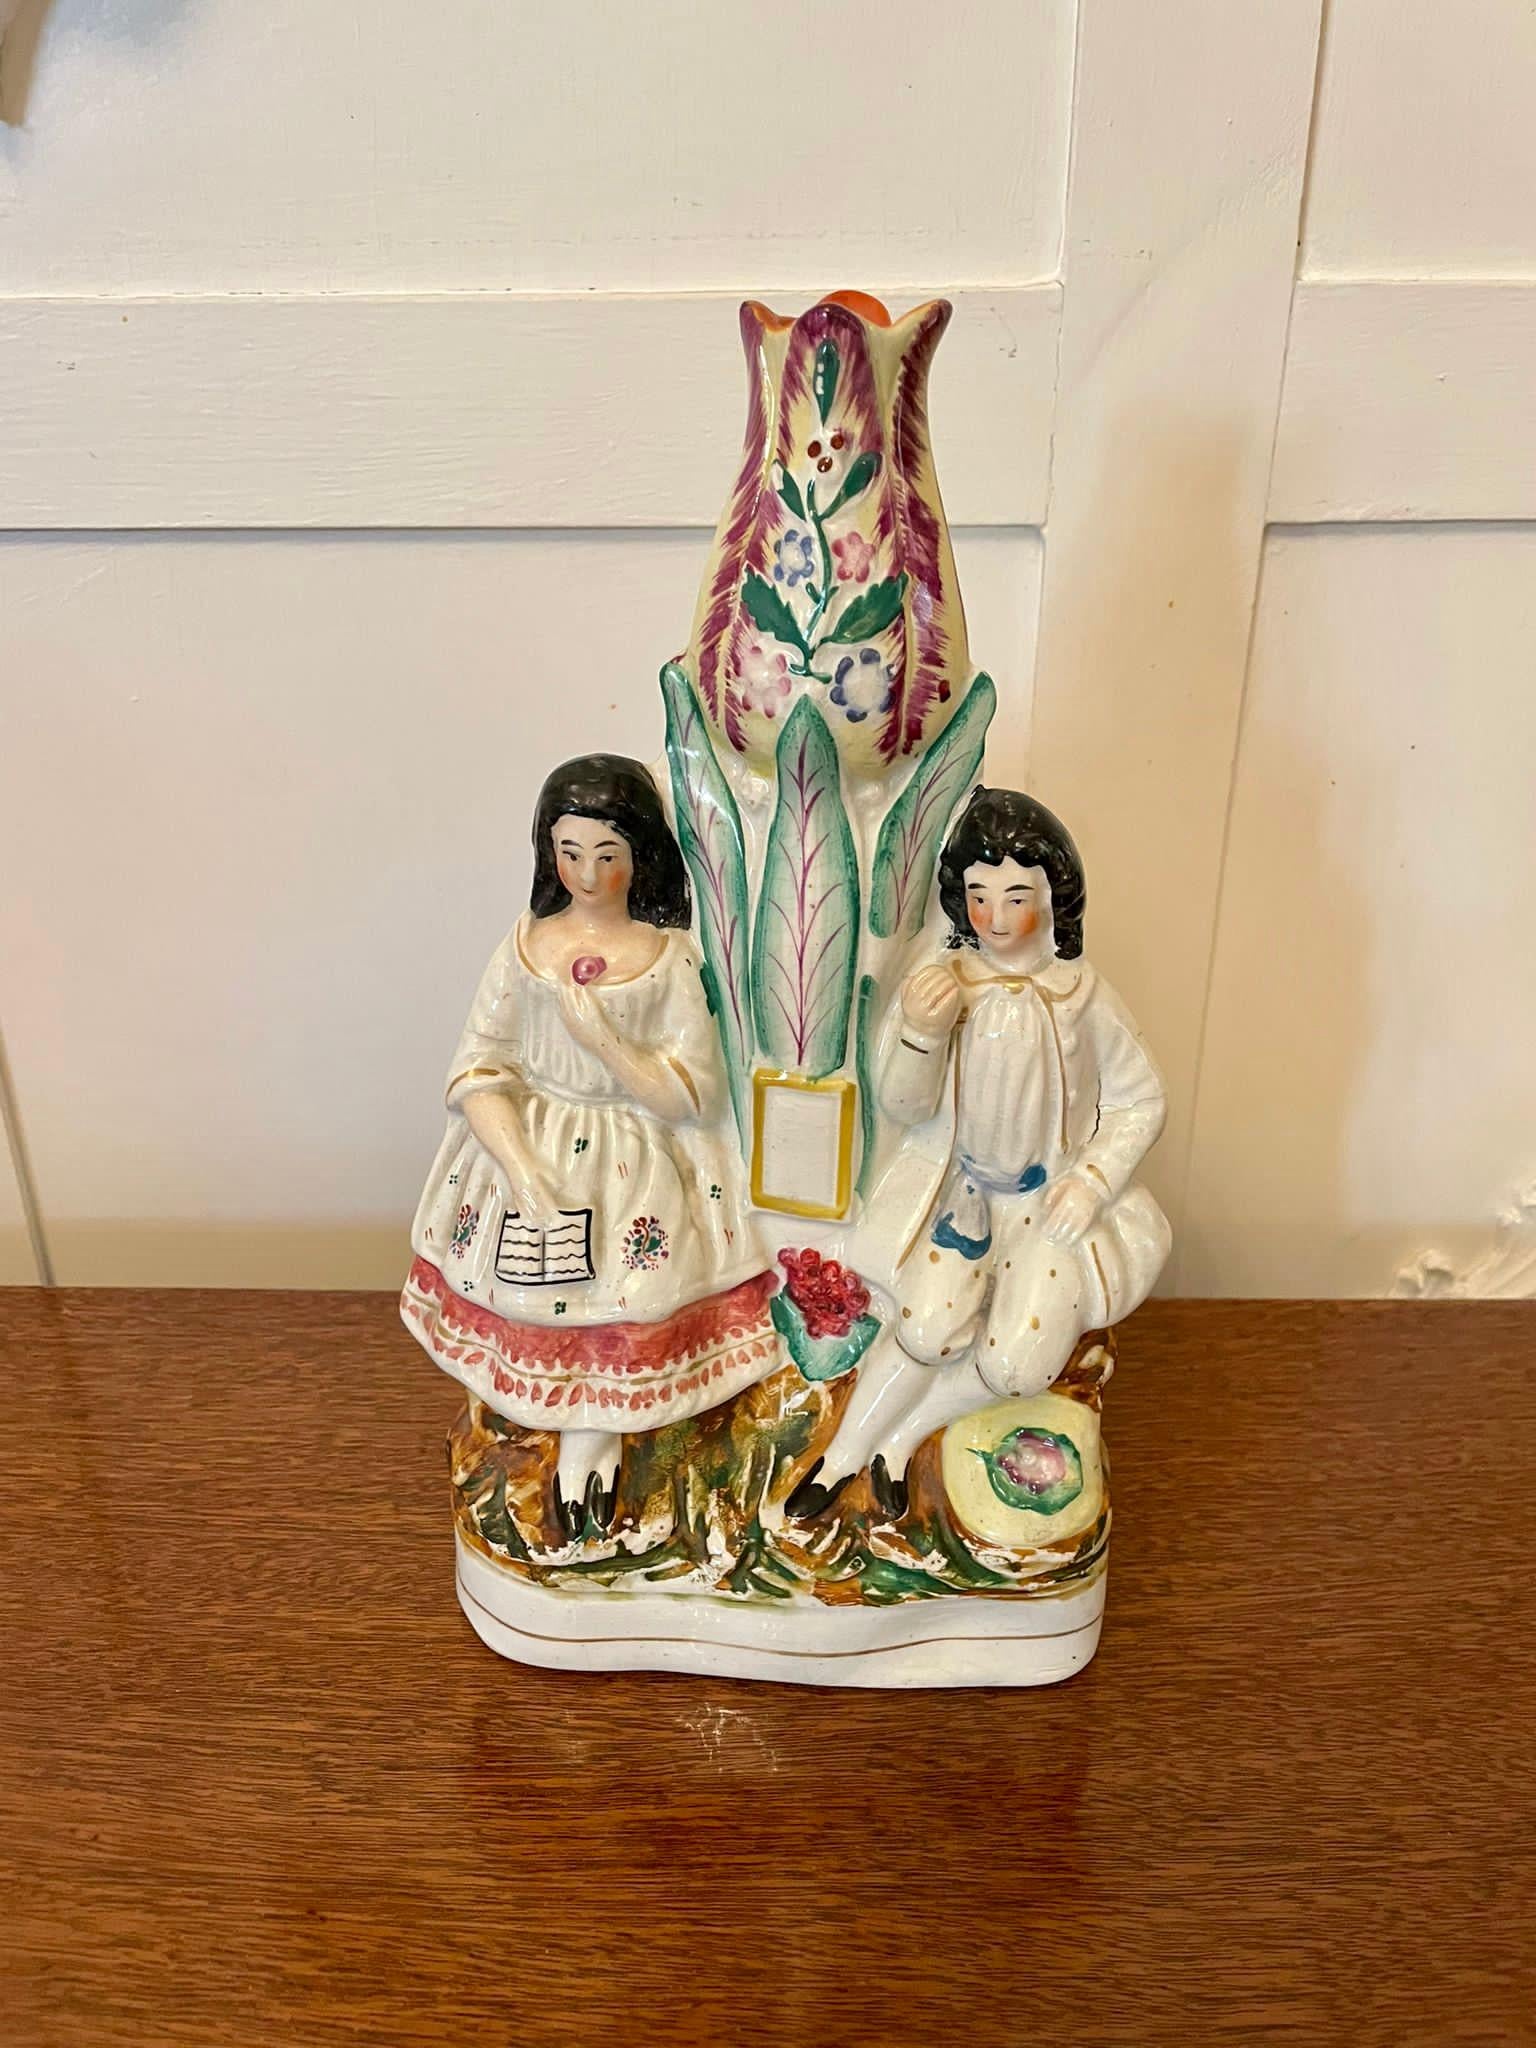 Antique Victorian Staffordshire figures of a lady and gentleman in period clothing between a colourful tree.

Measures: H 27.5cm 
W 17cm 
D 7cm
Date 1860.
   